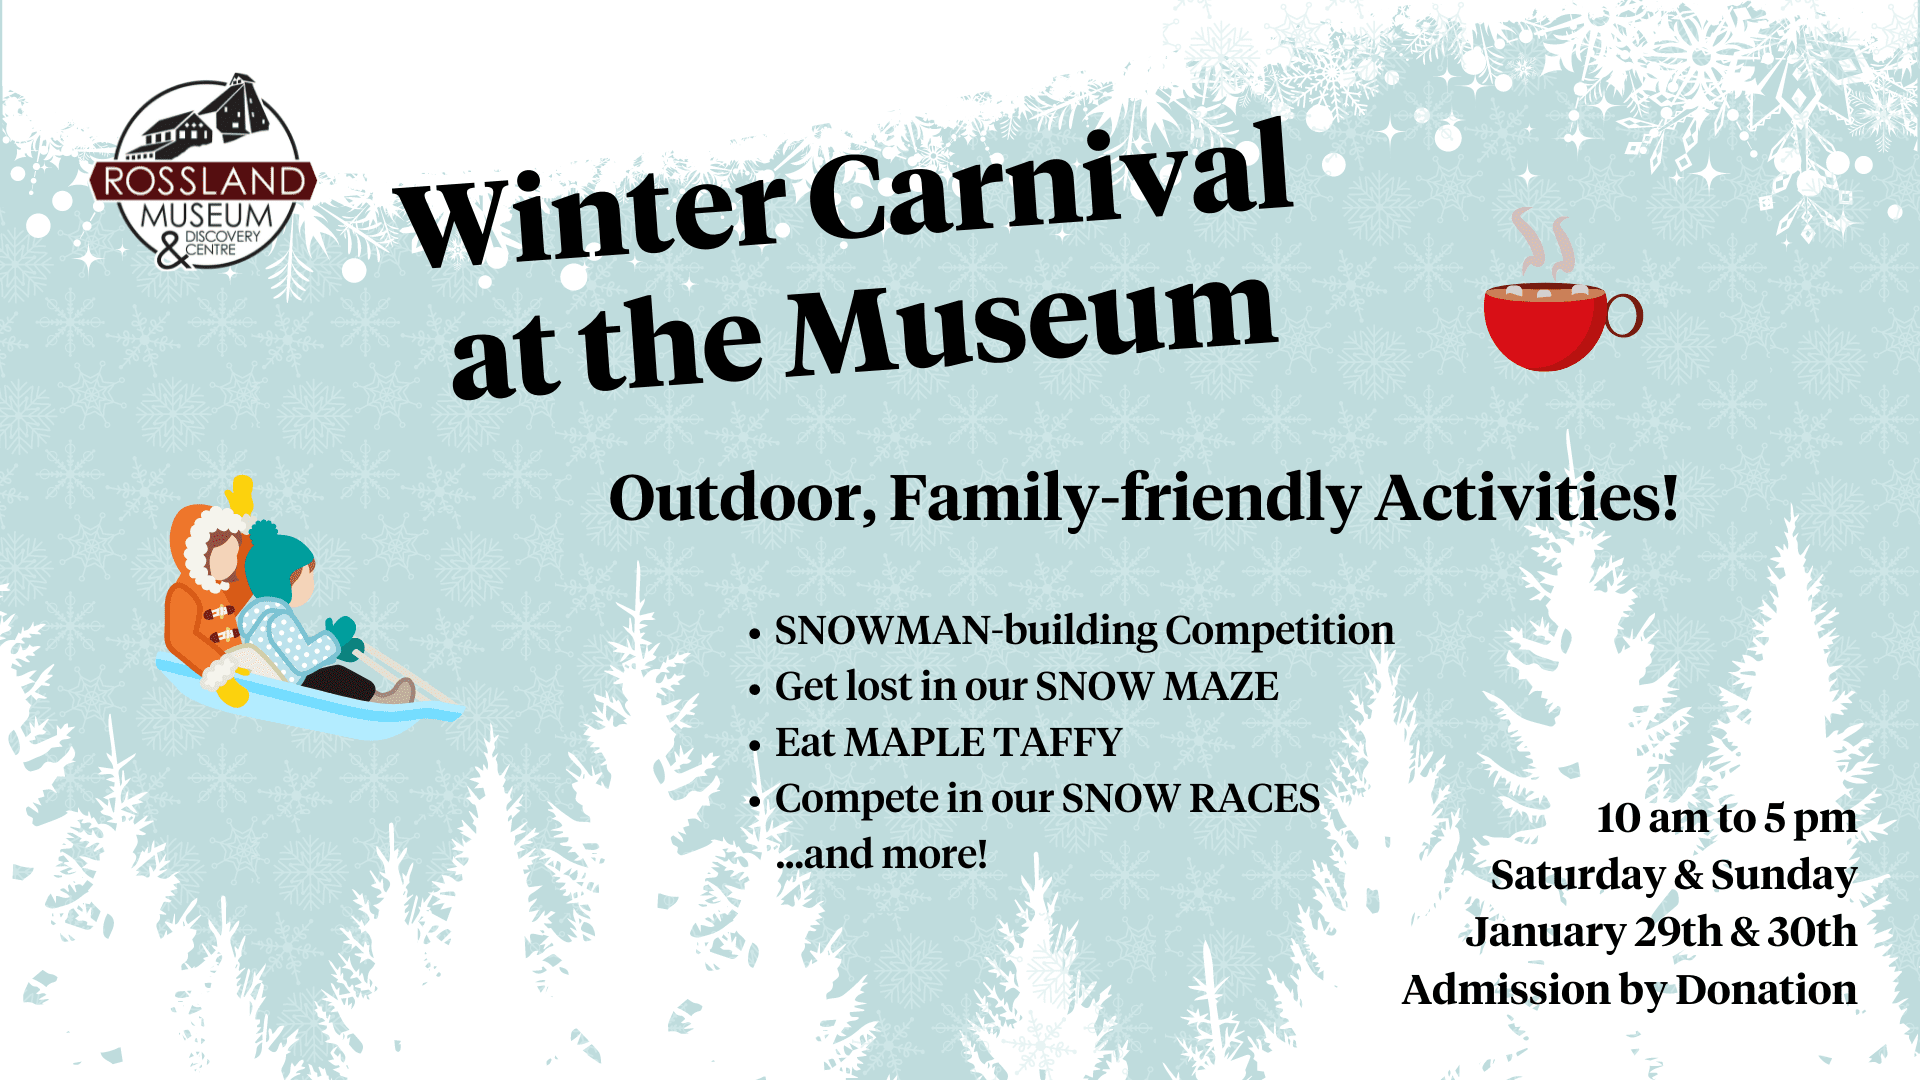 Upcoming Winter Carnival Plans at Rossland Museum